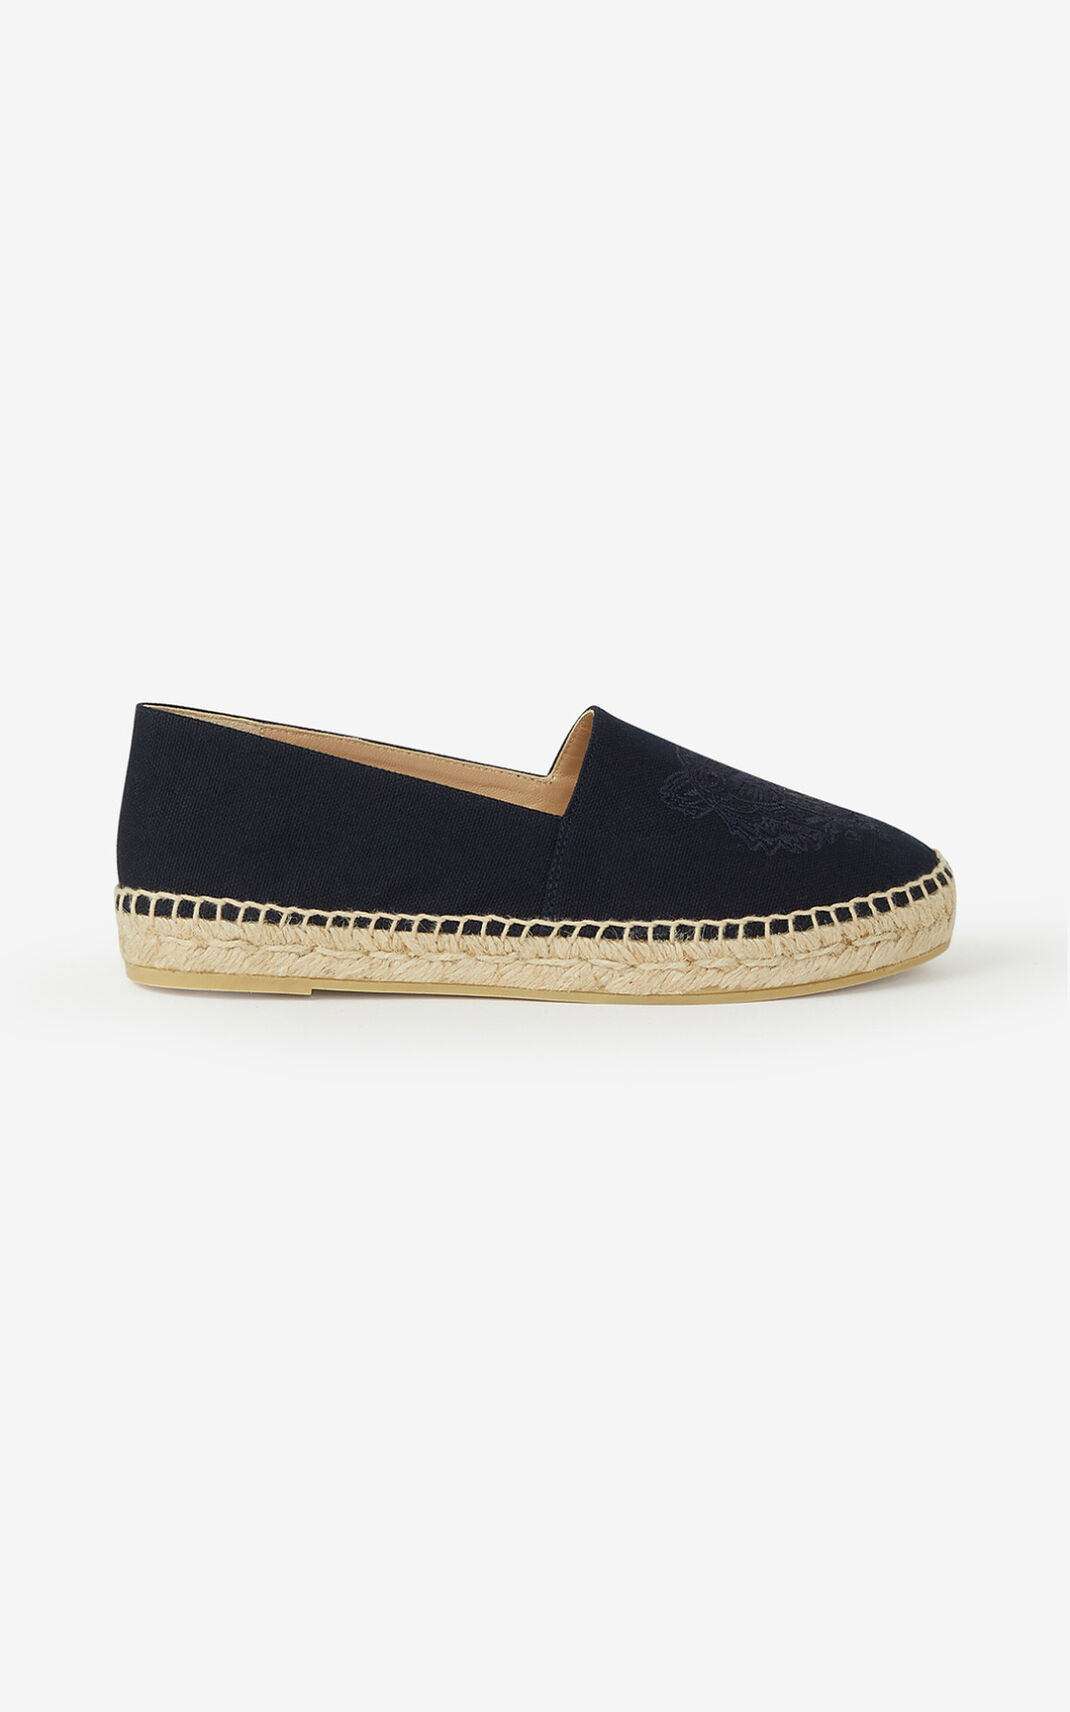 Kenzo Canvas Tiger Espadrilles Navy Blue For Womens 6914KGIPS